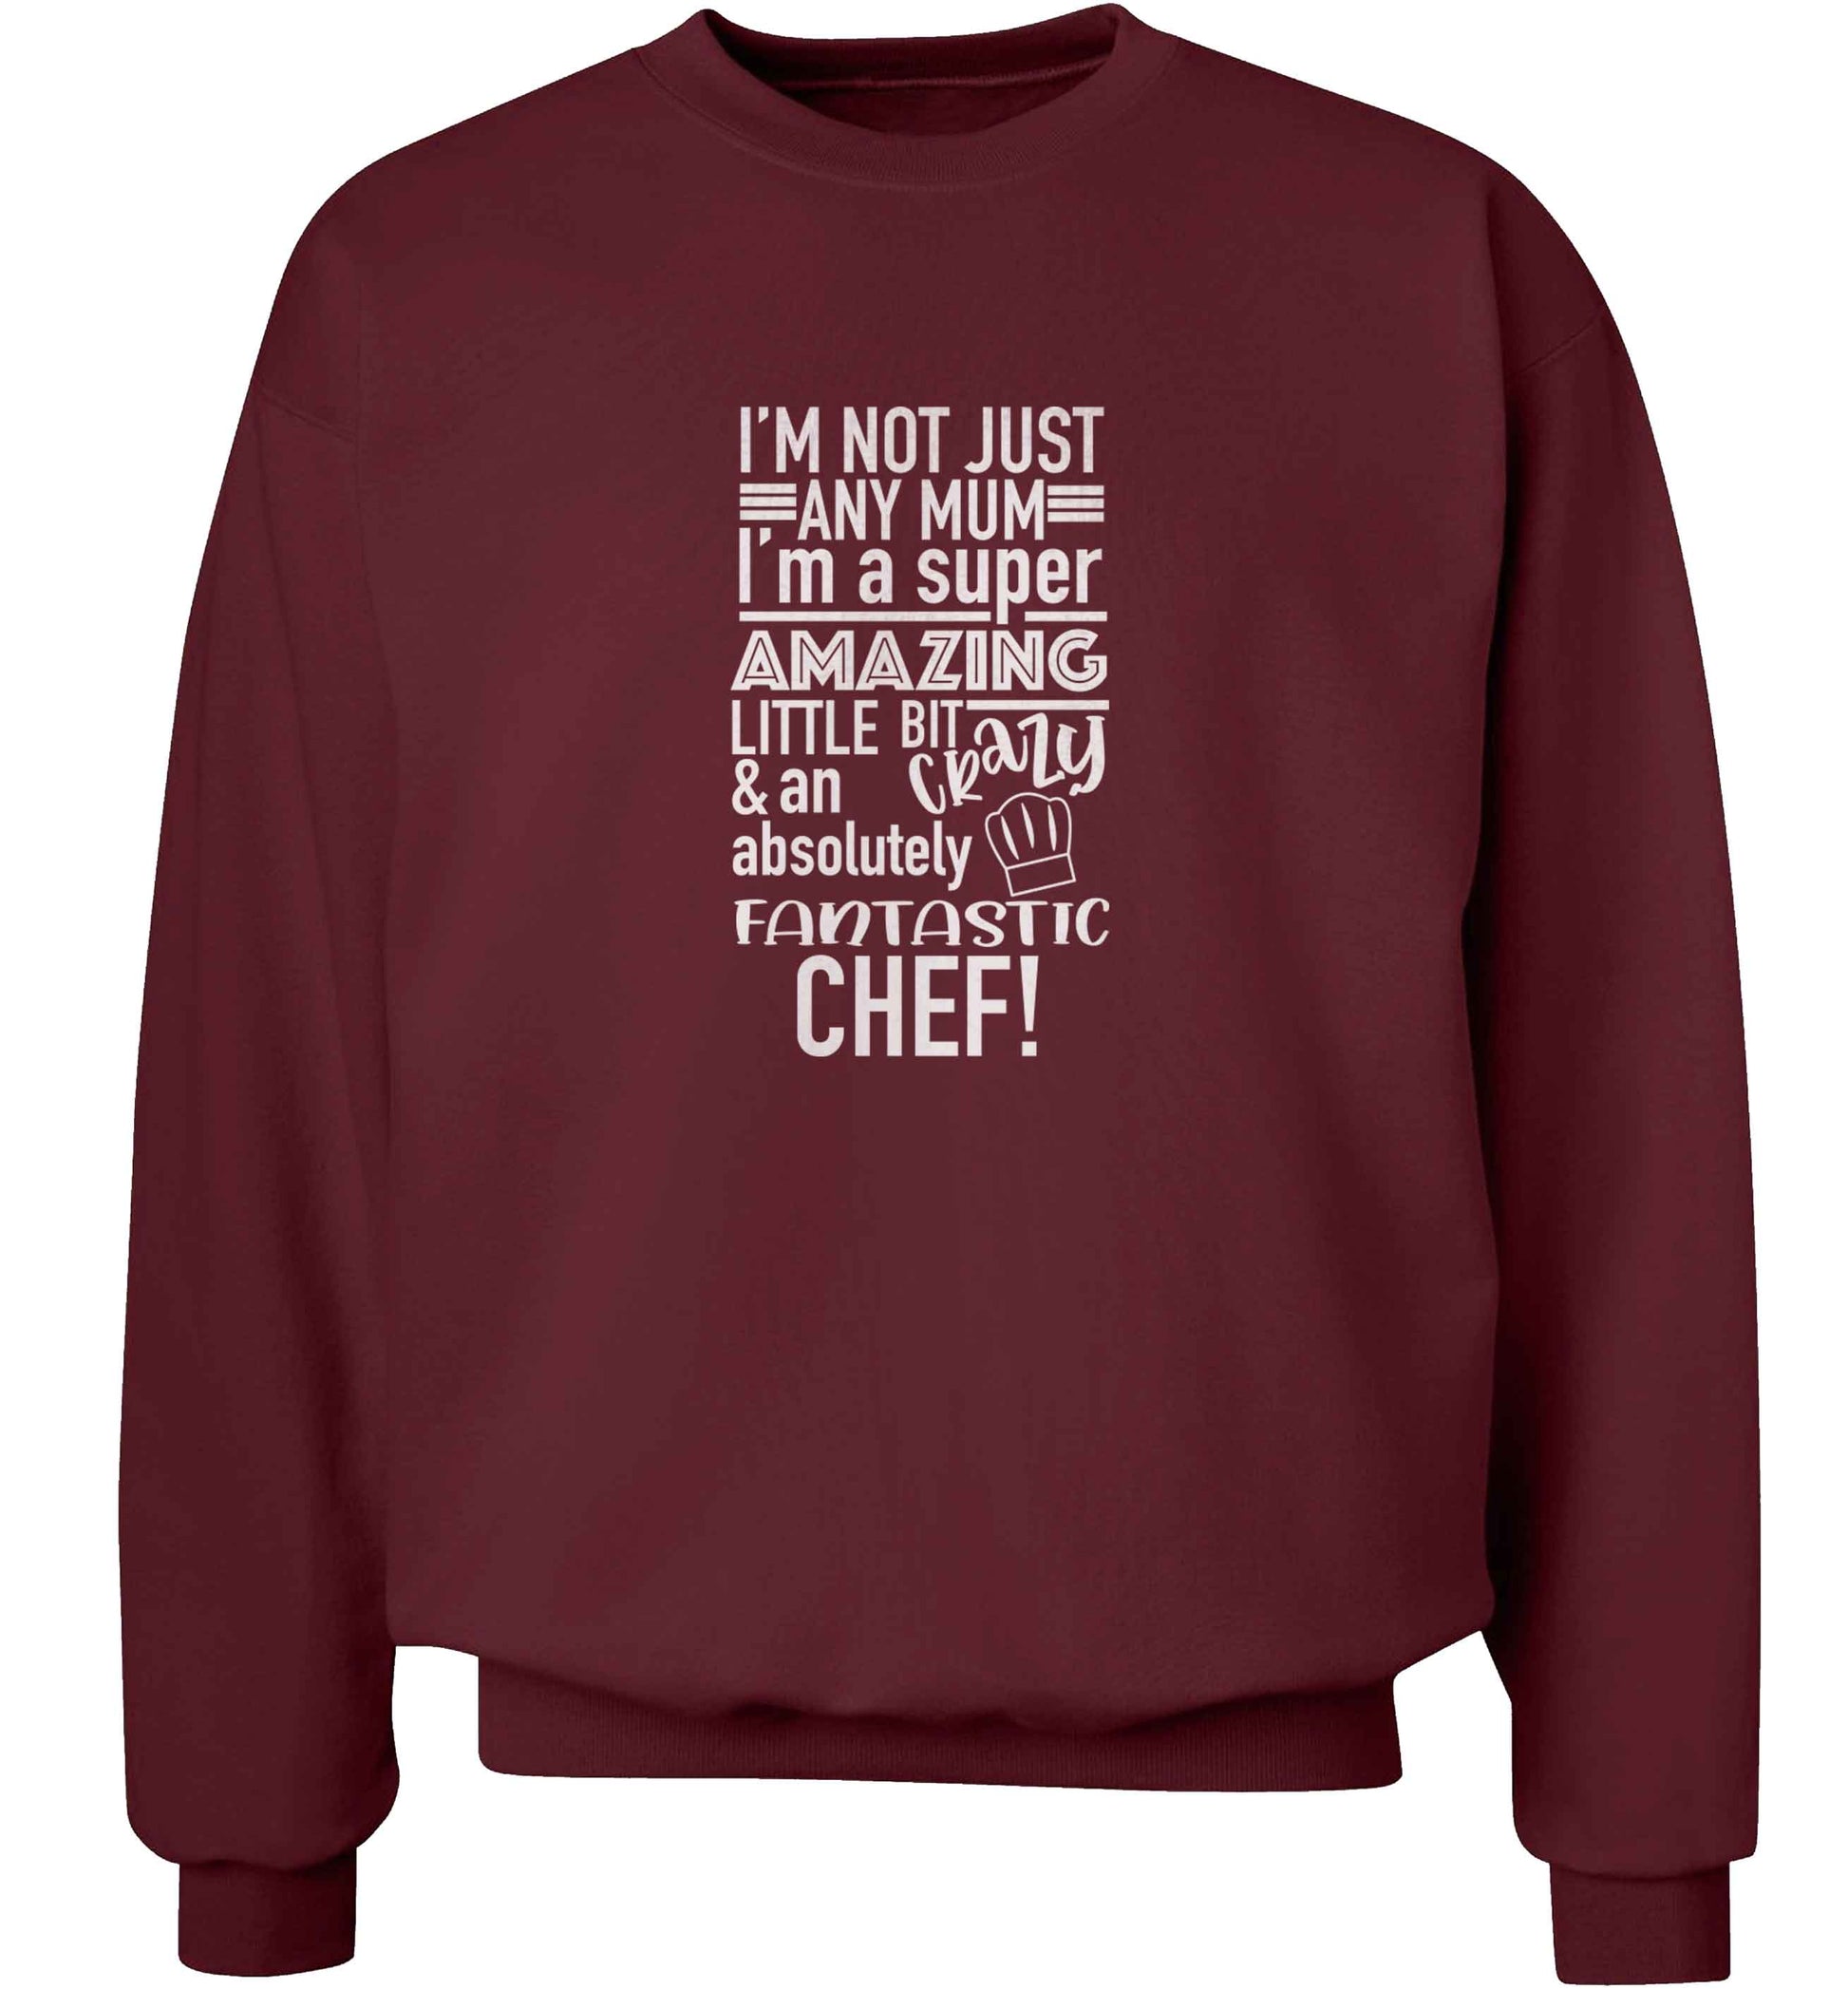 I'm not just any mum I'm a super amazing little bit crazy and an absolutely fantastic chef! adult's unisex maroon sweater 2XL